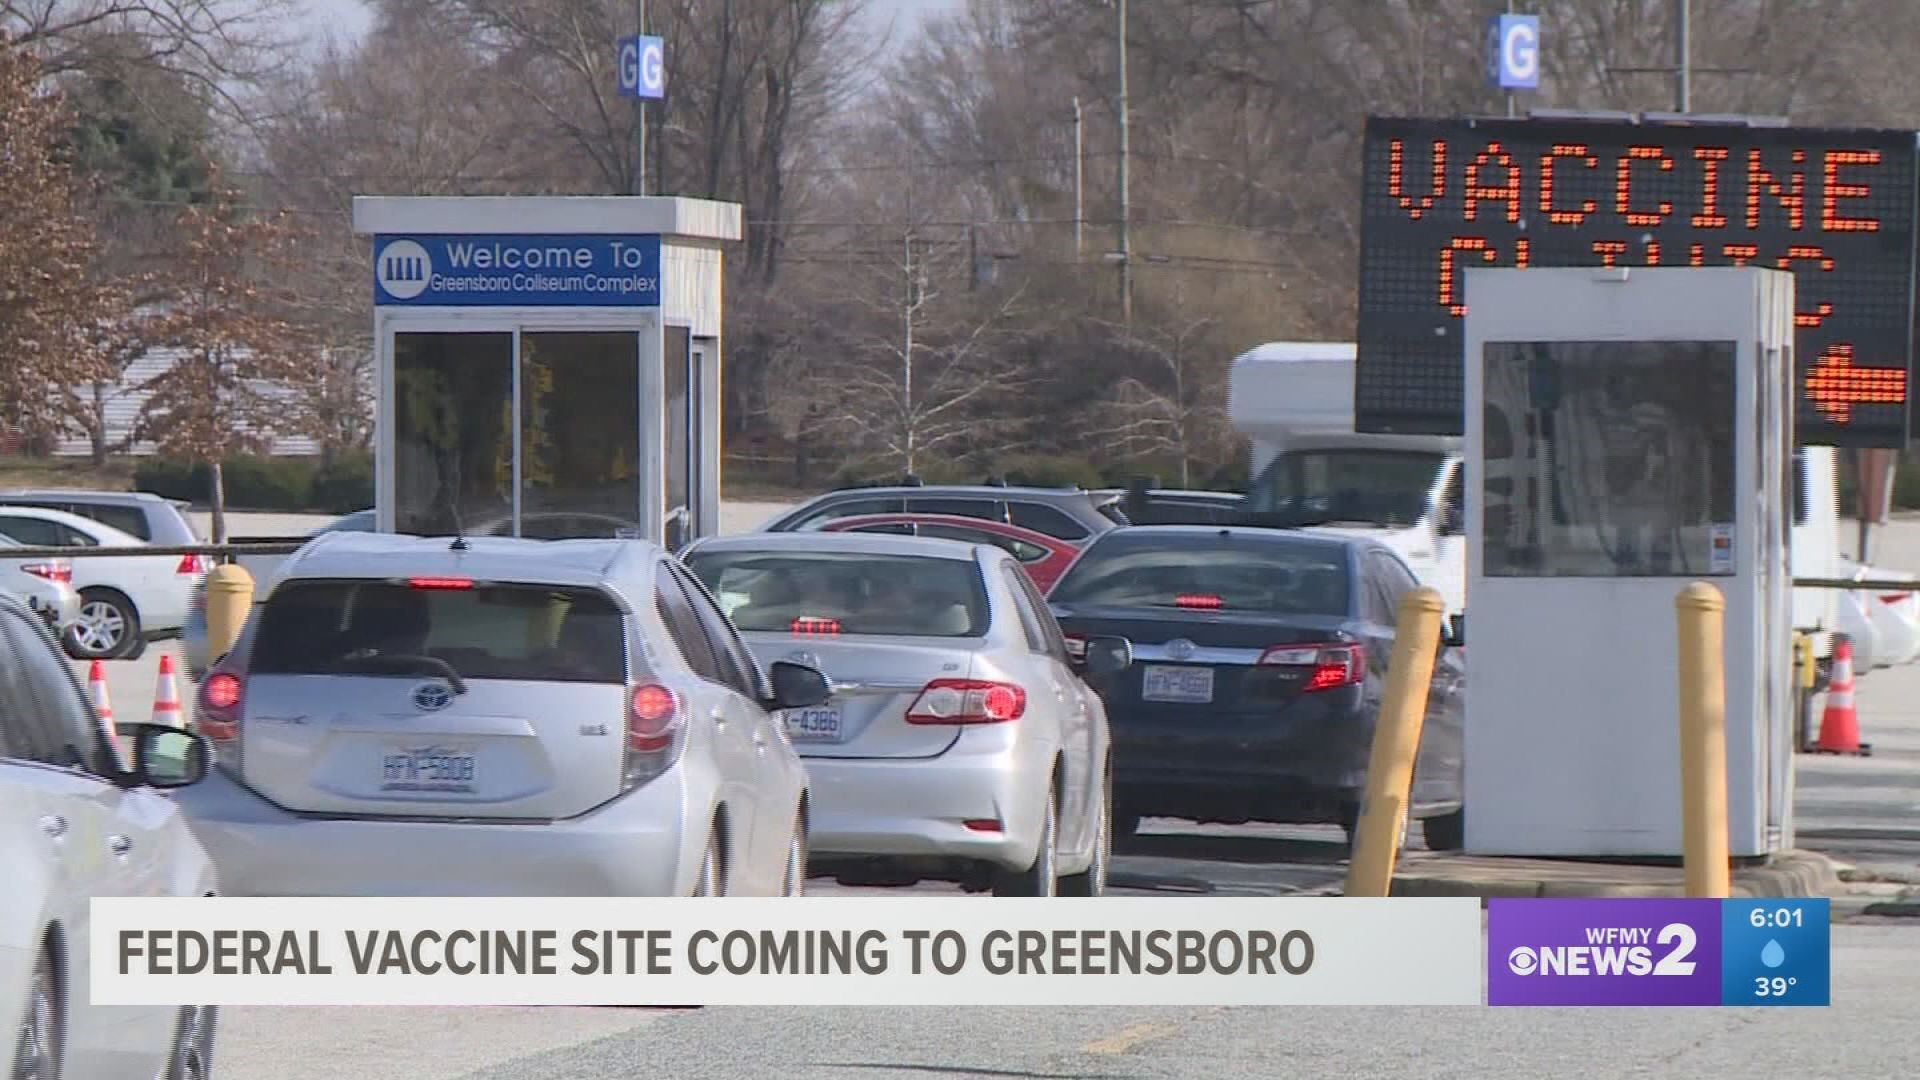 The White House COVID-19 response team announced Greensboro will get federal funds for a mass vaccine clinic. The clinic will vaccinate 3,000 people per day.